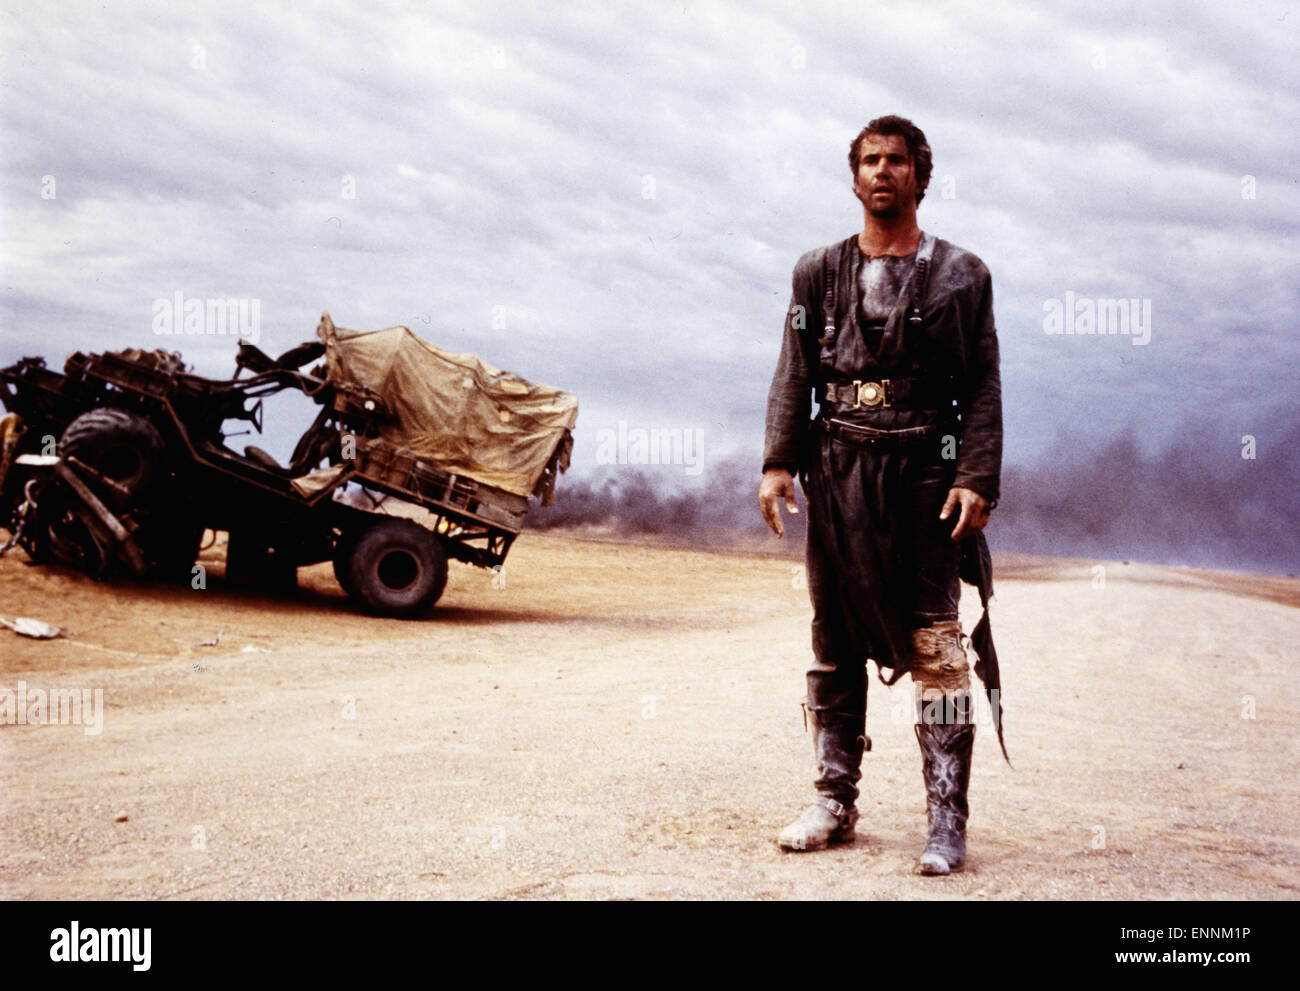 Mad Max oltre Thunderdome, aka Mad Max - Jenseits der Donnerkuppel, Australien 1985, George Miller, George Ogilvie, Mel Gibson Foto Stock